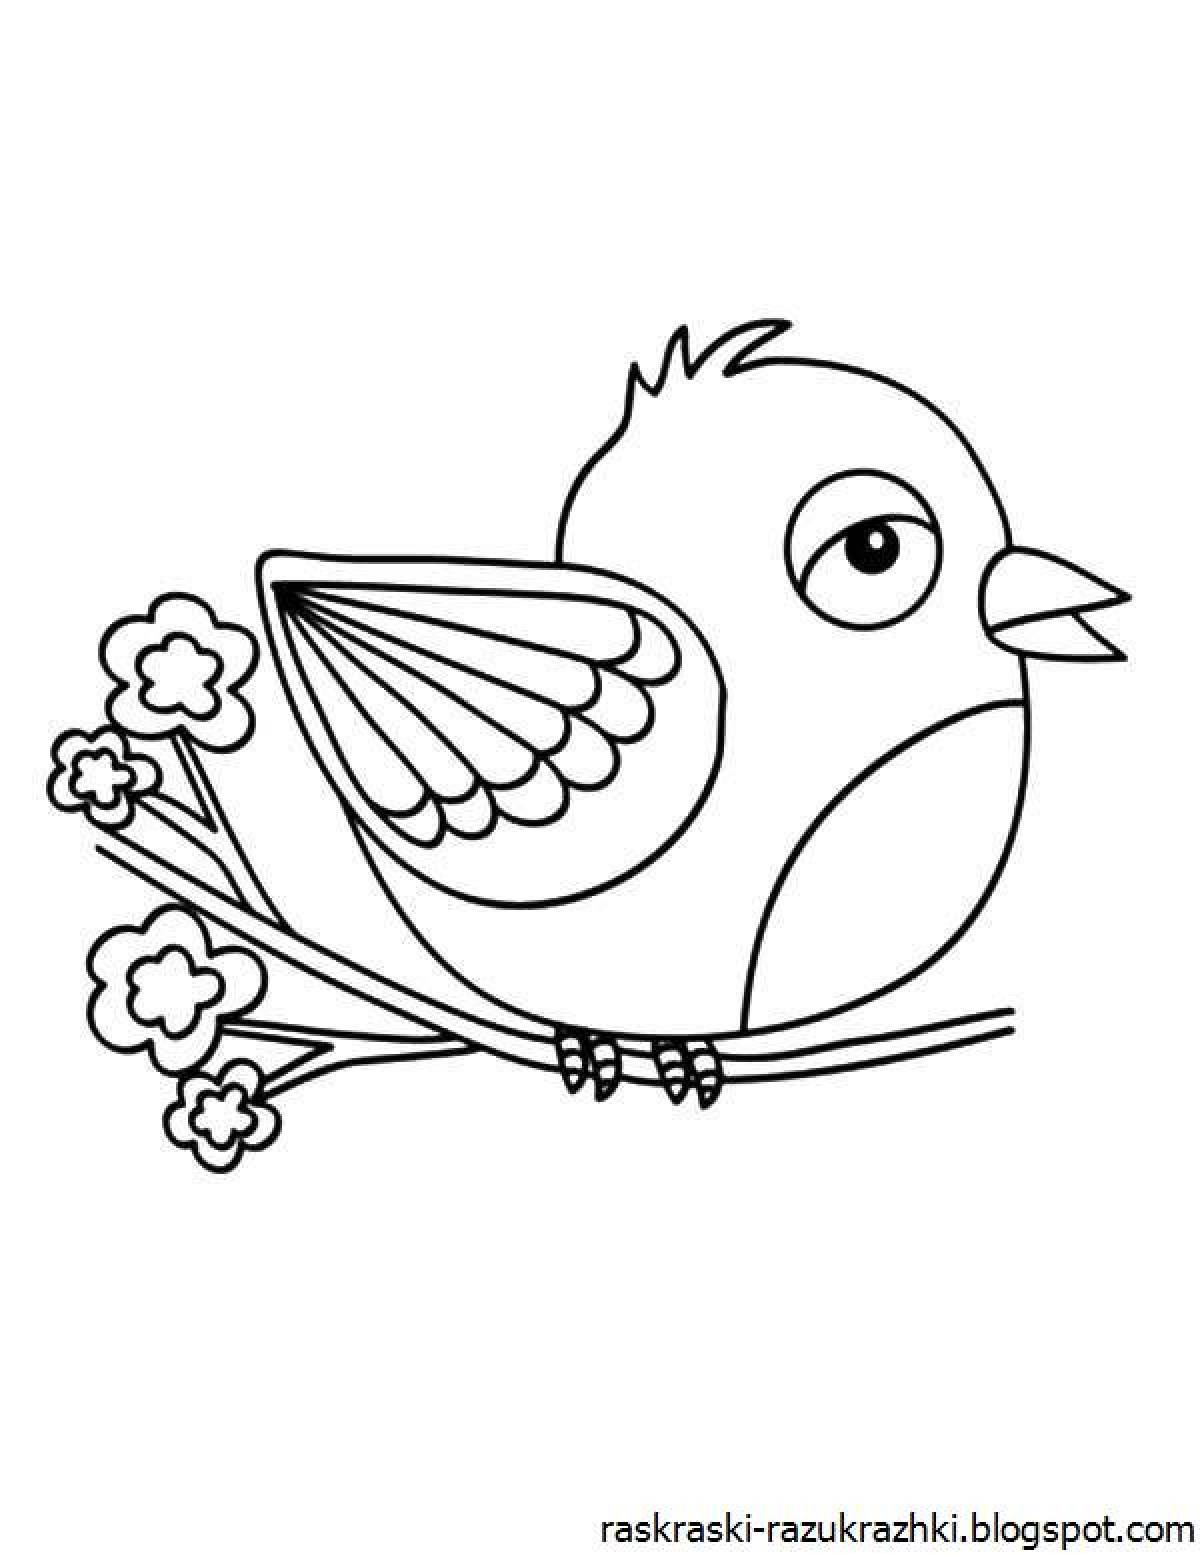 Vibrant bird coloring pages for kids